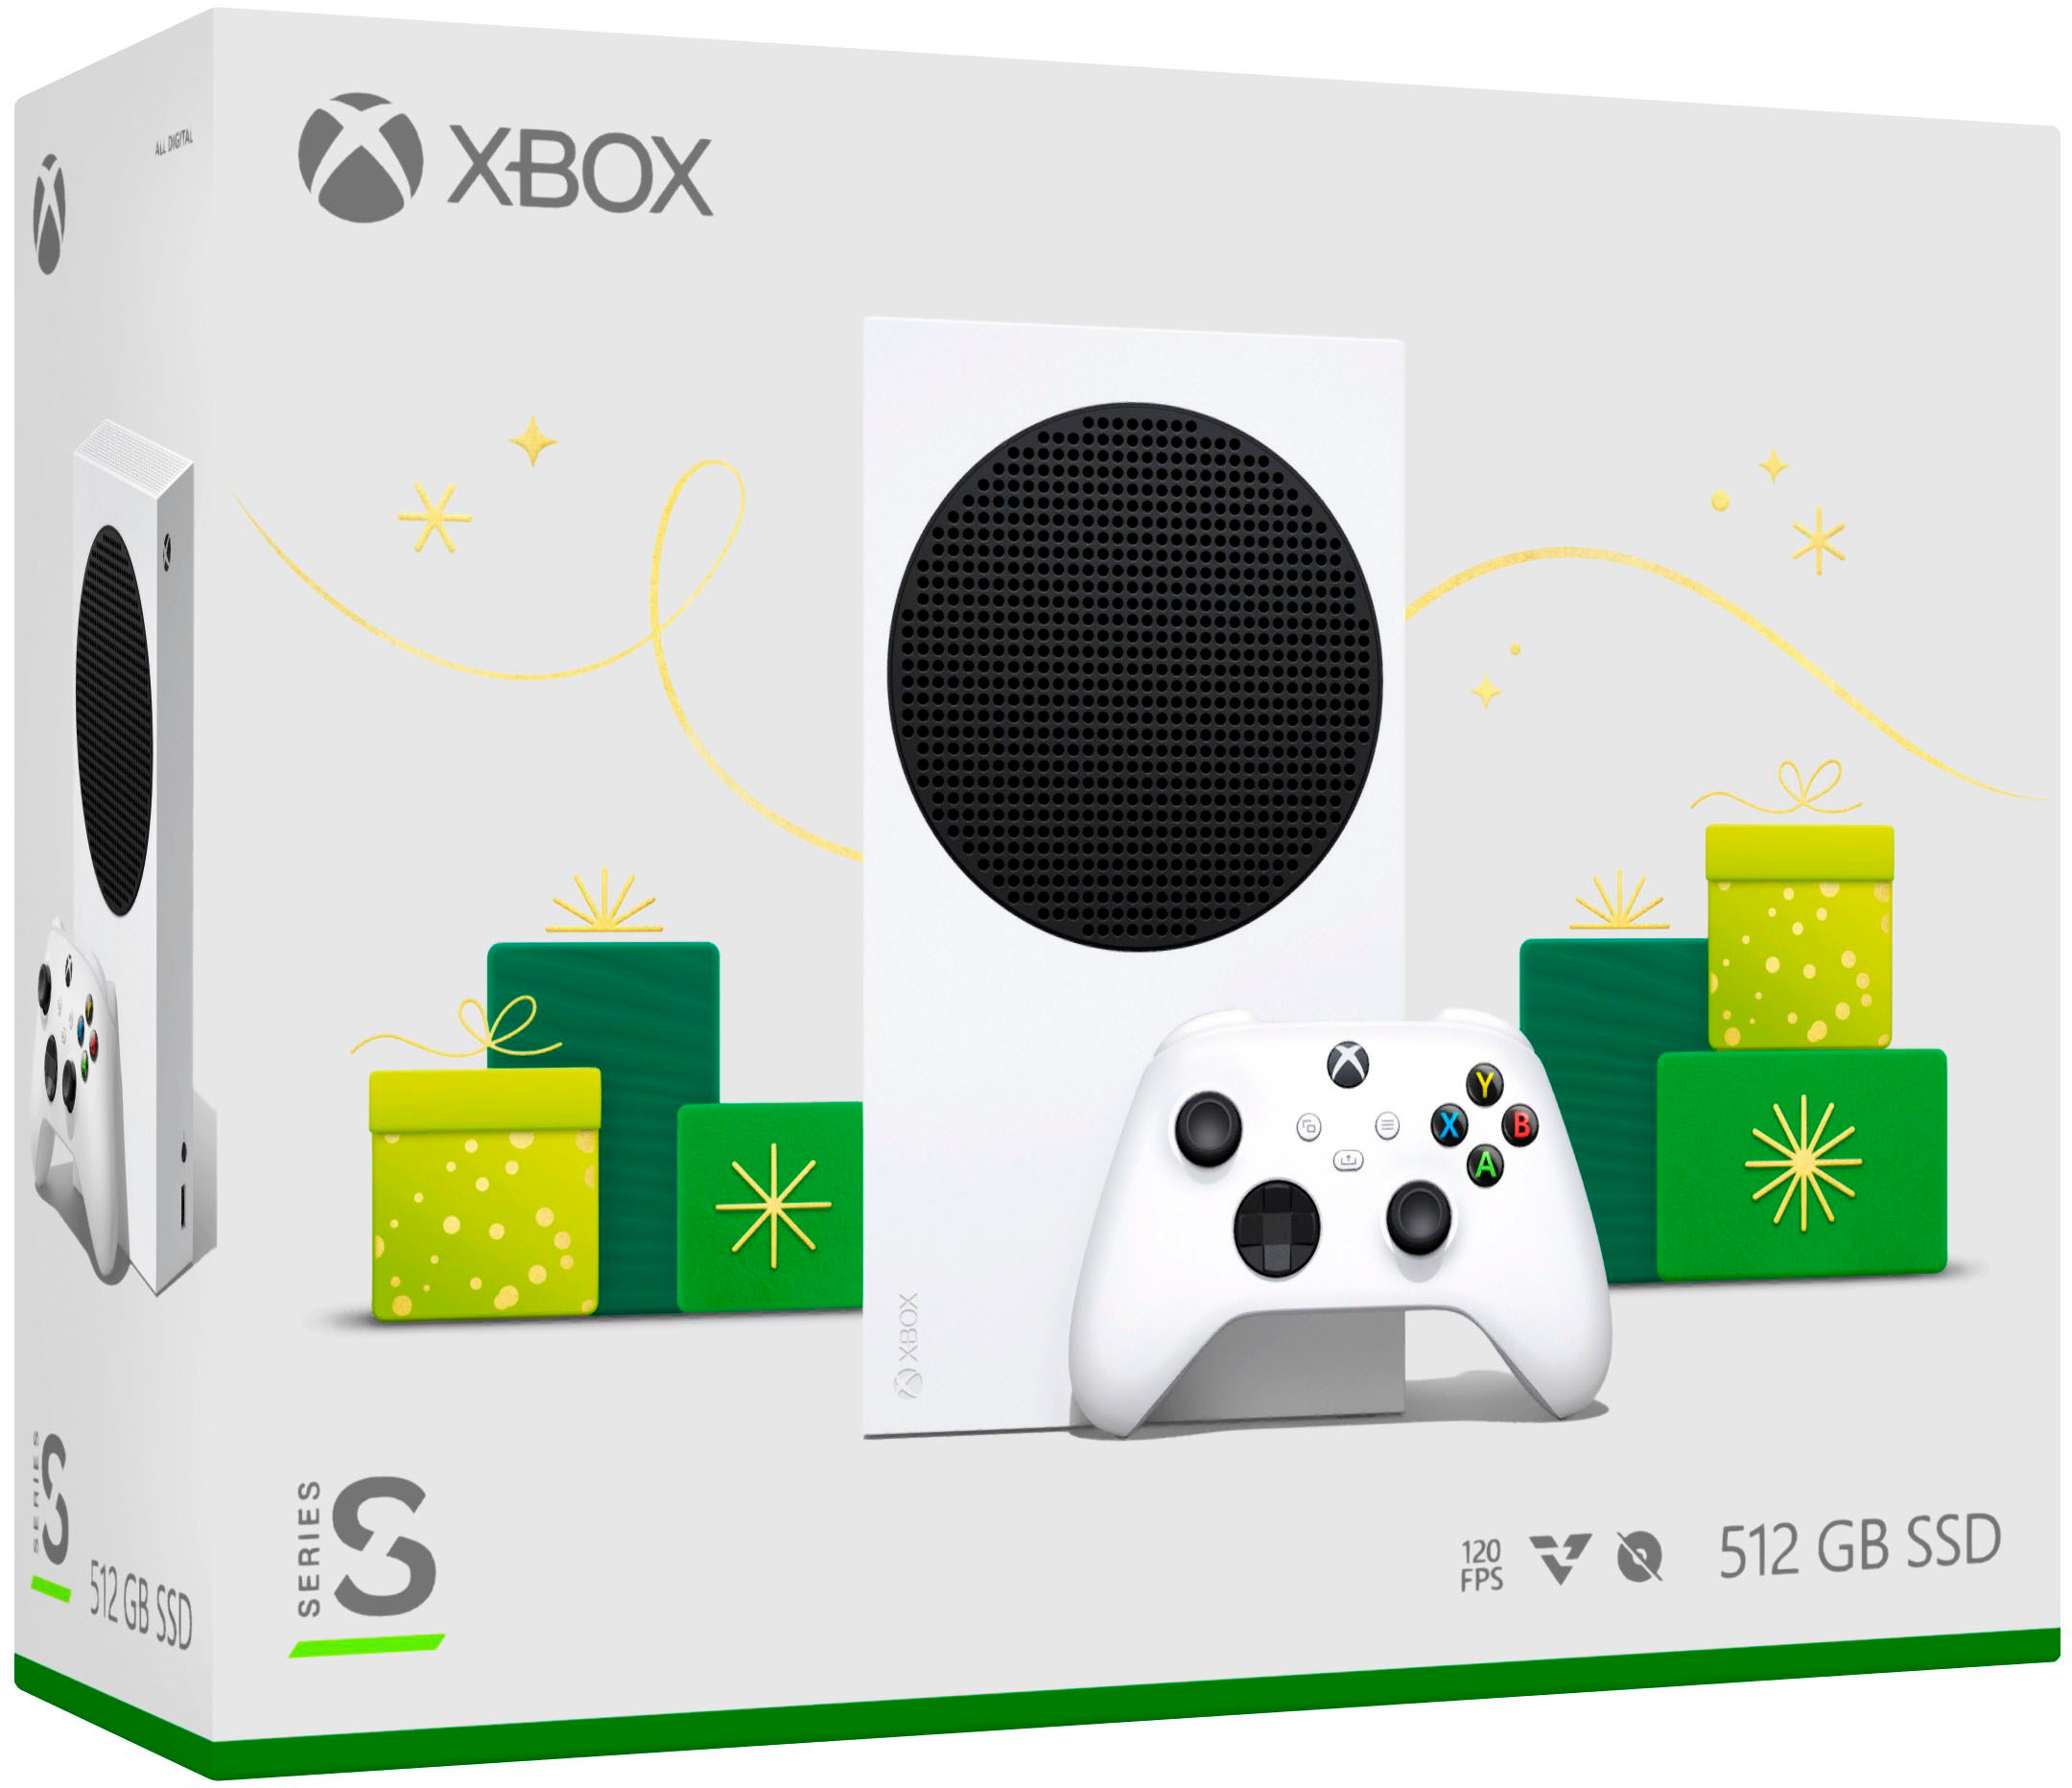 Microsoft Xbox Series S 512 GB All-Digital (Disc-Free Gaming) - Holiday Console - White $240